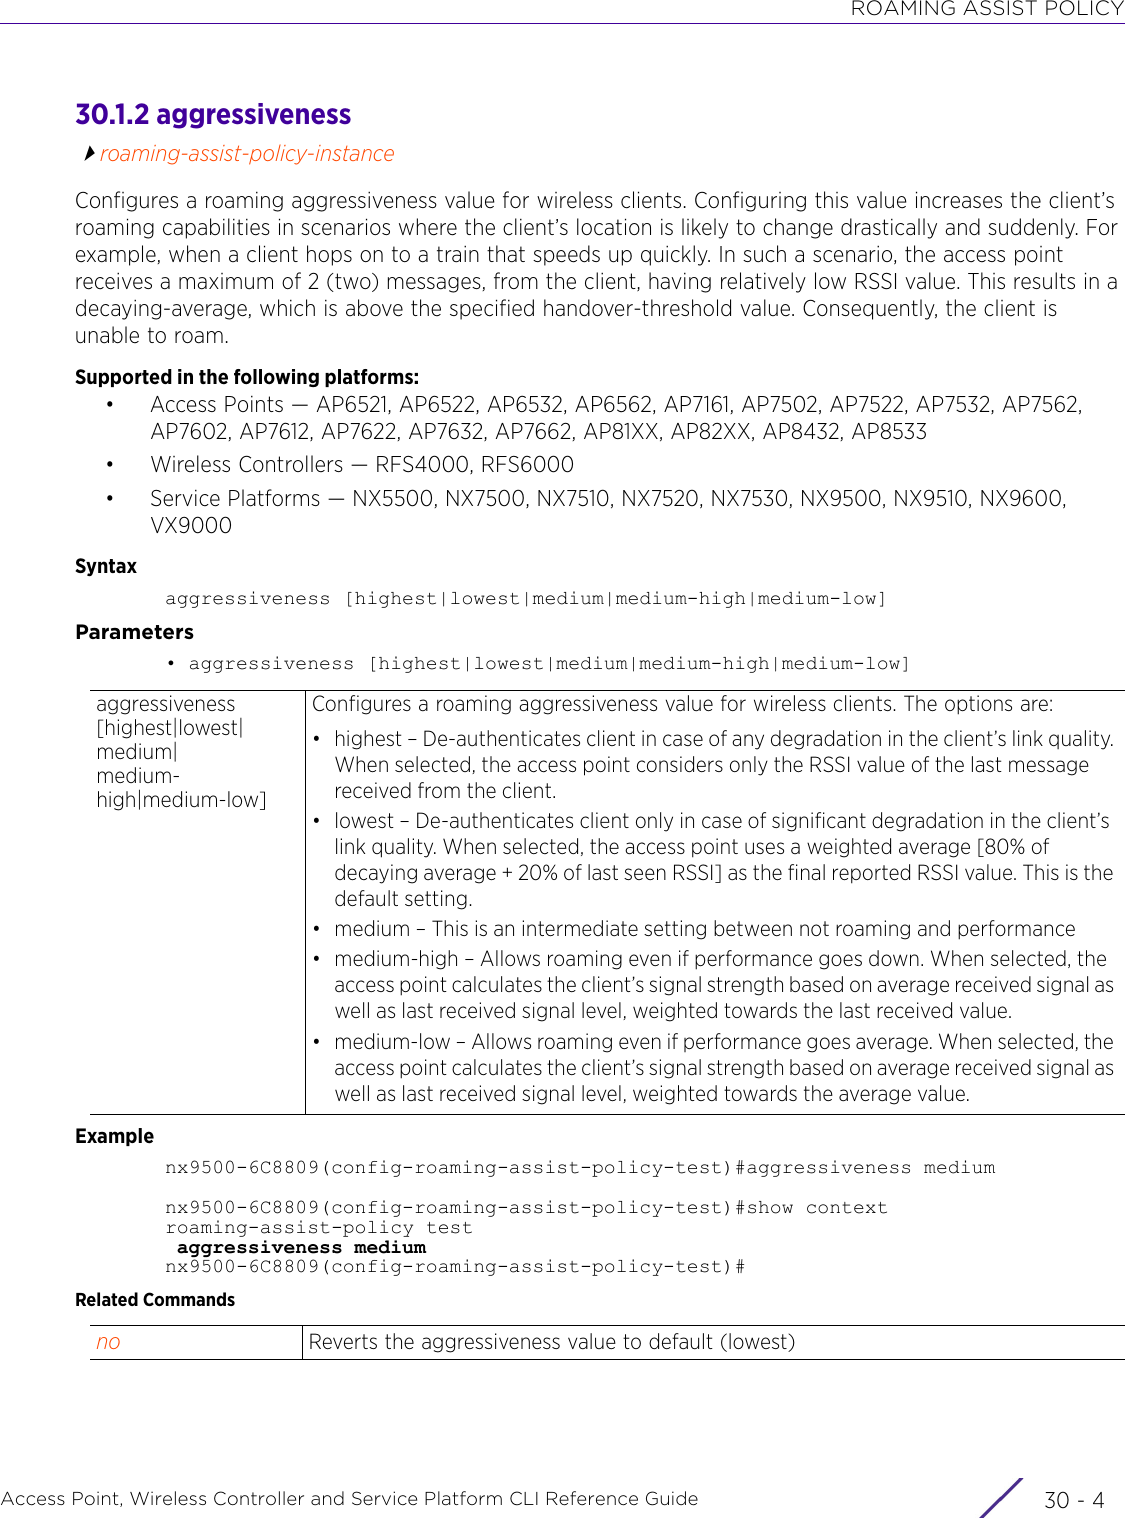 ROAMING ASSIST POLICYAccess Point, Wireless Controller and Service Platform CLI Reference Guide  30 - 430.1.2 aggressivenessroaming-assist-policy-instanceConfigures a roaming aggressiveness value for wireless clients. Configuring this value increases the client’s roaming capabilities in scenarios where the client’s location is likely to change drastically and suddenly. For example, when a client hops on to a train that speeds up quickly. In such a scenario, the access point receives a maximum of 2 (two) messages, from the client, having relatively low RSSI value. This results in a decaying-average, which is above the specified handover-threshold value. Consequently, the client is unable to roam.Supported in the following platforms:• Access Points — AP6521, AP6522, AP6532, AP6562, AP7161, AP7502, AP7522, AP7532, AP7562, AP7602, AP7612, AP7622, AP7632, AP7662, AP81XX, AP82XX, AP8432, AP8533• Wireless Controllers — RFS4000, RFS6000• Service Platforms — NX5500, NX7500, NX7510, NX7520, NX7530, NX9500, NX9510, NX9600, VX9000Syntaxaggressiveness [highest|lowest|medium|medium-high|medium-low]Parameters• aggressiveness [highest|lowest|medium|medium-high|medium-low]Examplenx9500-6C8809(config-roaming-assist-policy-test)#aggressiveness mediumnx9500-6C8809(config-roaming-assist-policy-test)#show contextroaming-assist-policy test aggressiveness mediumnx9500-6C8809(config-roaming-assist-policy-test)#Related Commandsaggressiveness [highest|lowest|medium|medium-high|medium-low]Configures a roaming aggressiveness value for wireless clients. The options are:• highest – De-authenticates client in case of any degradation in the client’s link quality. When selected, the access point considers only the RSSI value of the last message received from the client.• lowest – De-authenticates client only in case of significant degradation in the client’s link quality. When selected, the access point uses a weighted average [80% of decaying average + 20% of last seen RSSI] as the final reported RSSI value. This is the default setting.• medium – This is an intermediate setting between not roaming and performance• medium-high – Allows roaming even if performance goes down. When selected, the access point calculates the client’s signal strength based on average received signal as well as last received signal level, weighted towards the last received value.• medium-low – Allows roaming even if performance goes average. When selected, the access point calculates the client’s signal strength based on average received signal as well as last received signal level, weighted towards the average value.no Reverts the aggressiveness value to default (lowest)